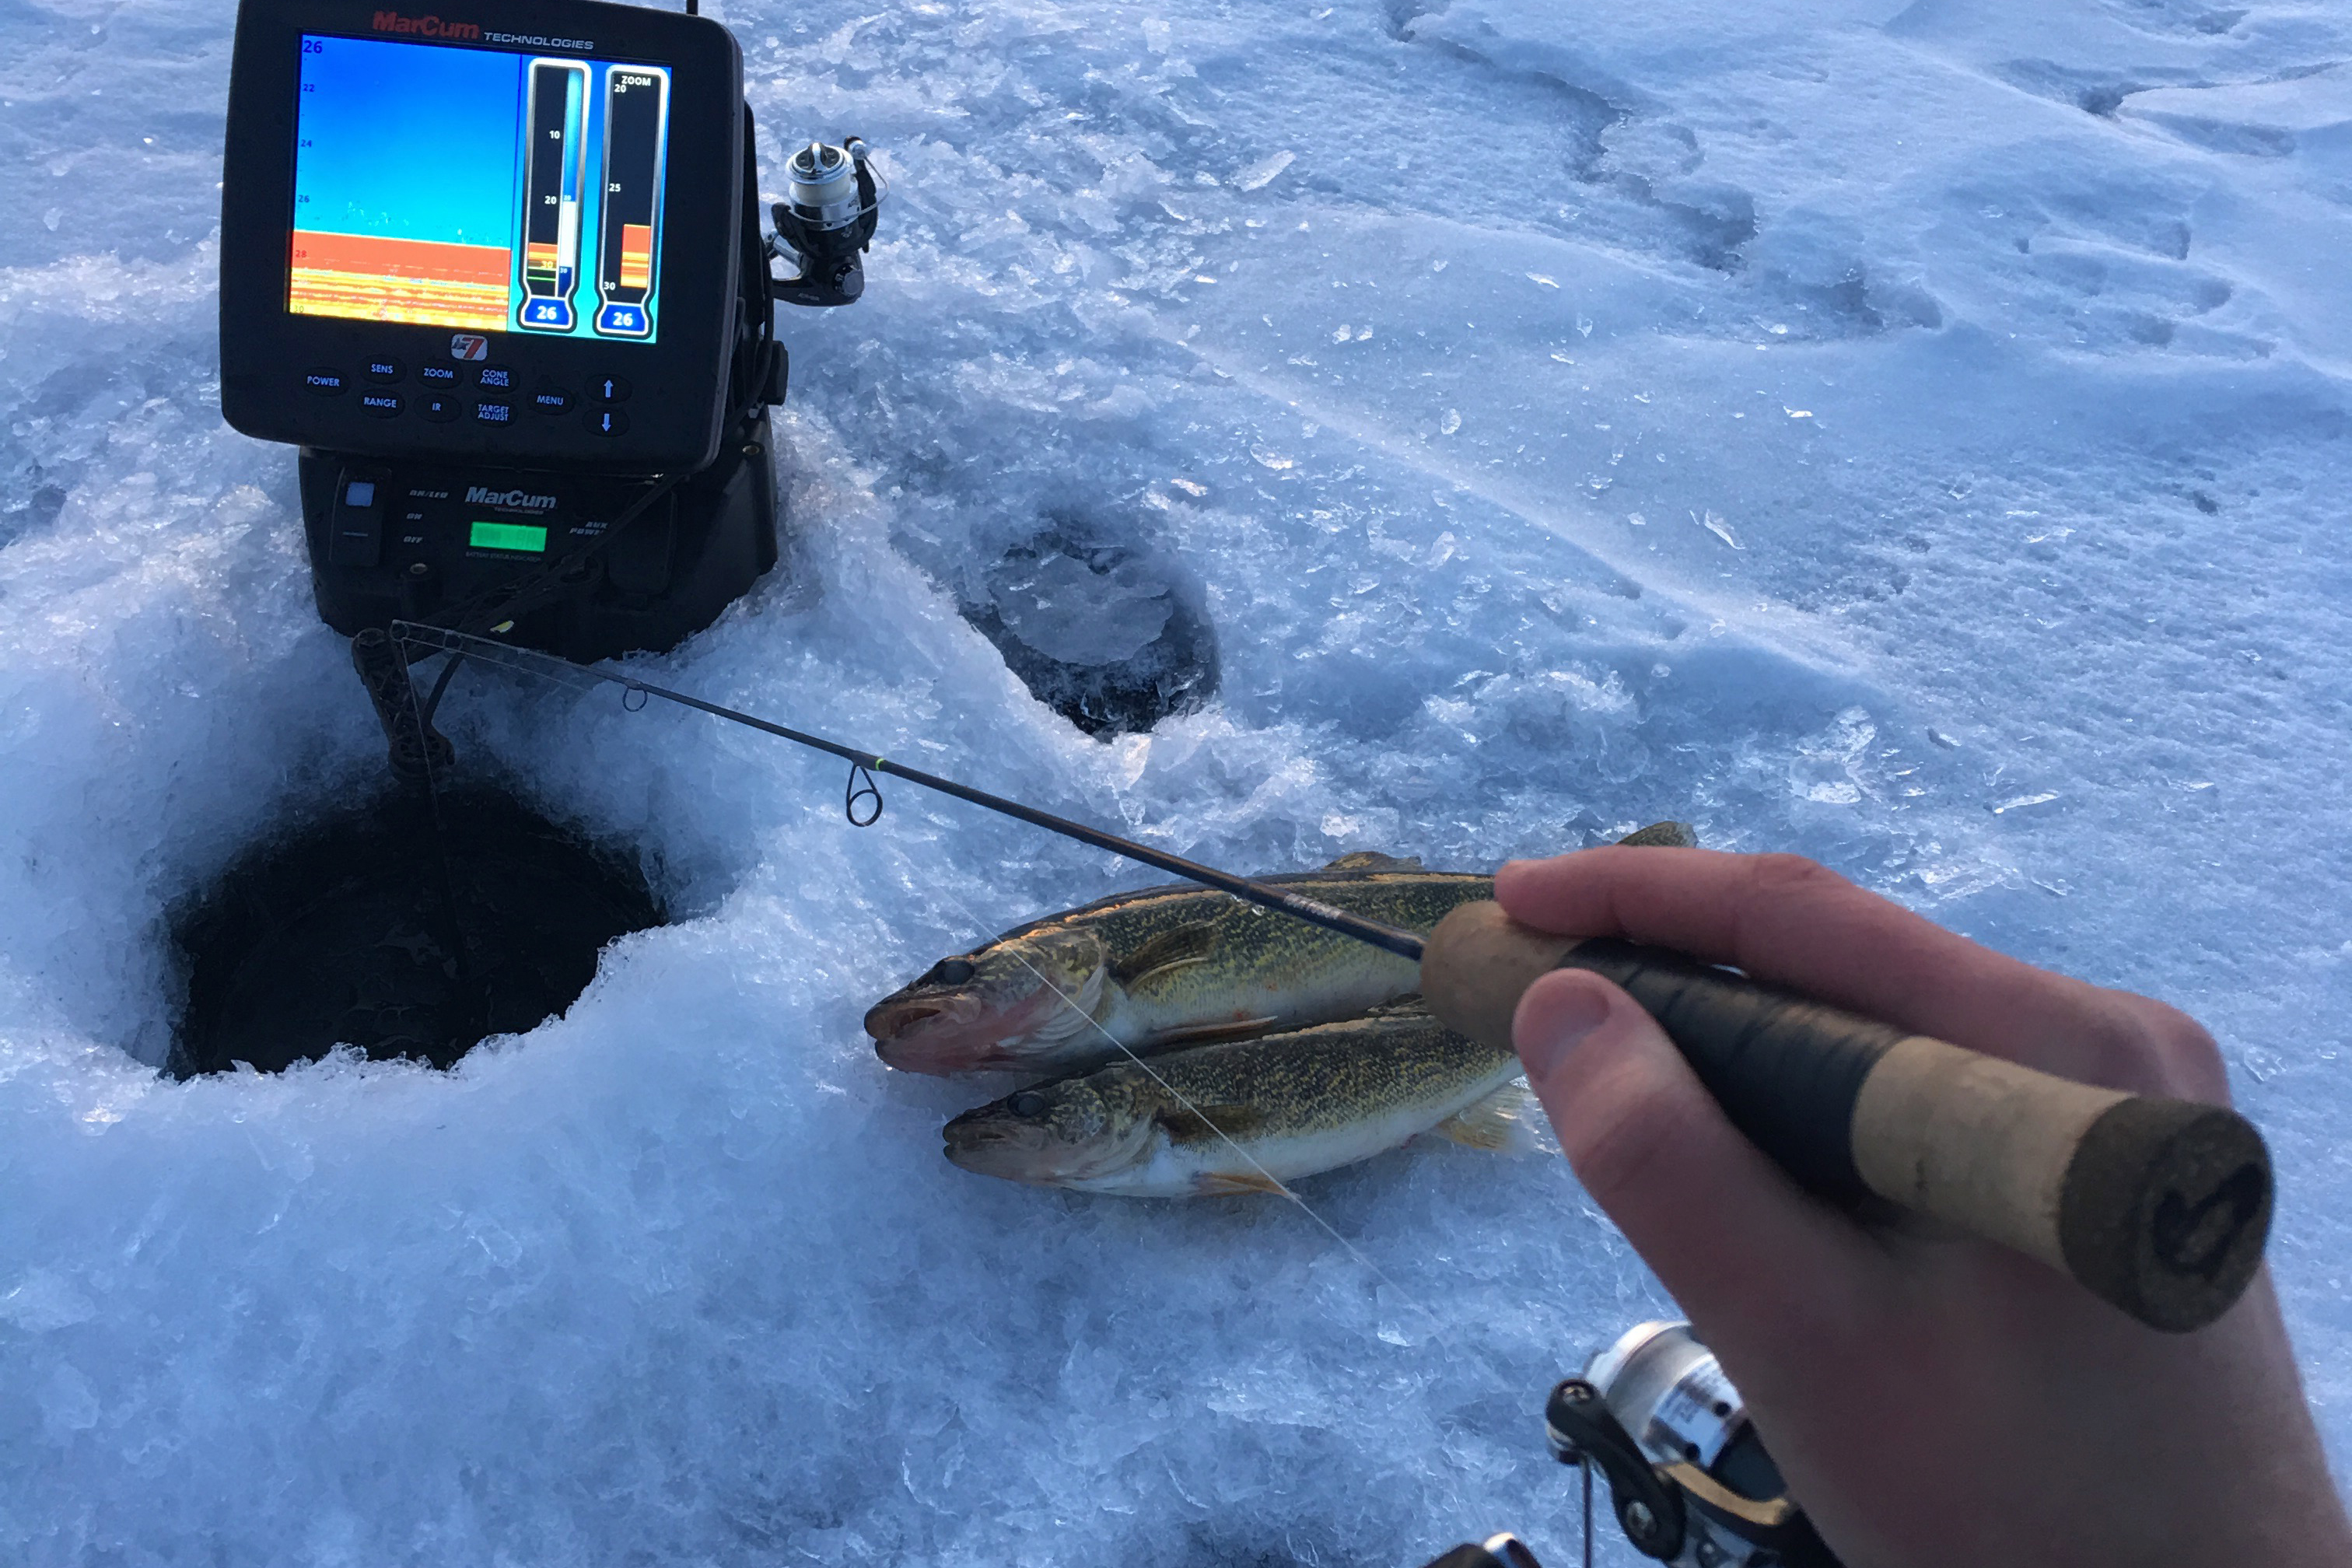 Ice fishing tips: Go-to baits and jigging tactics for first ice walleyes